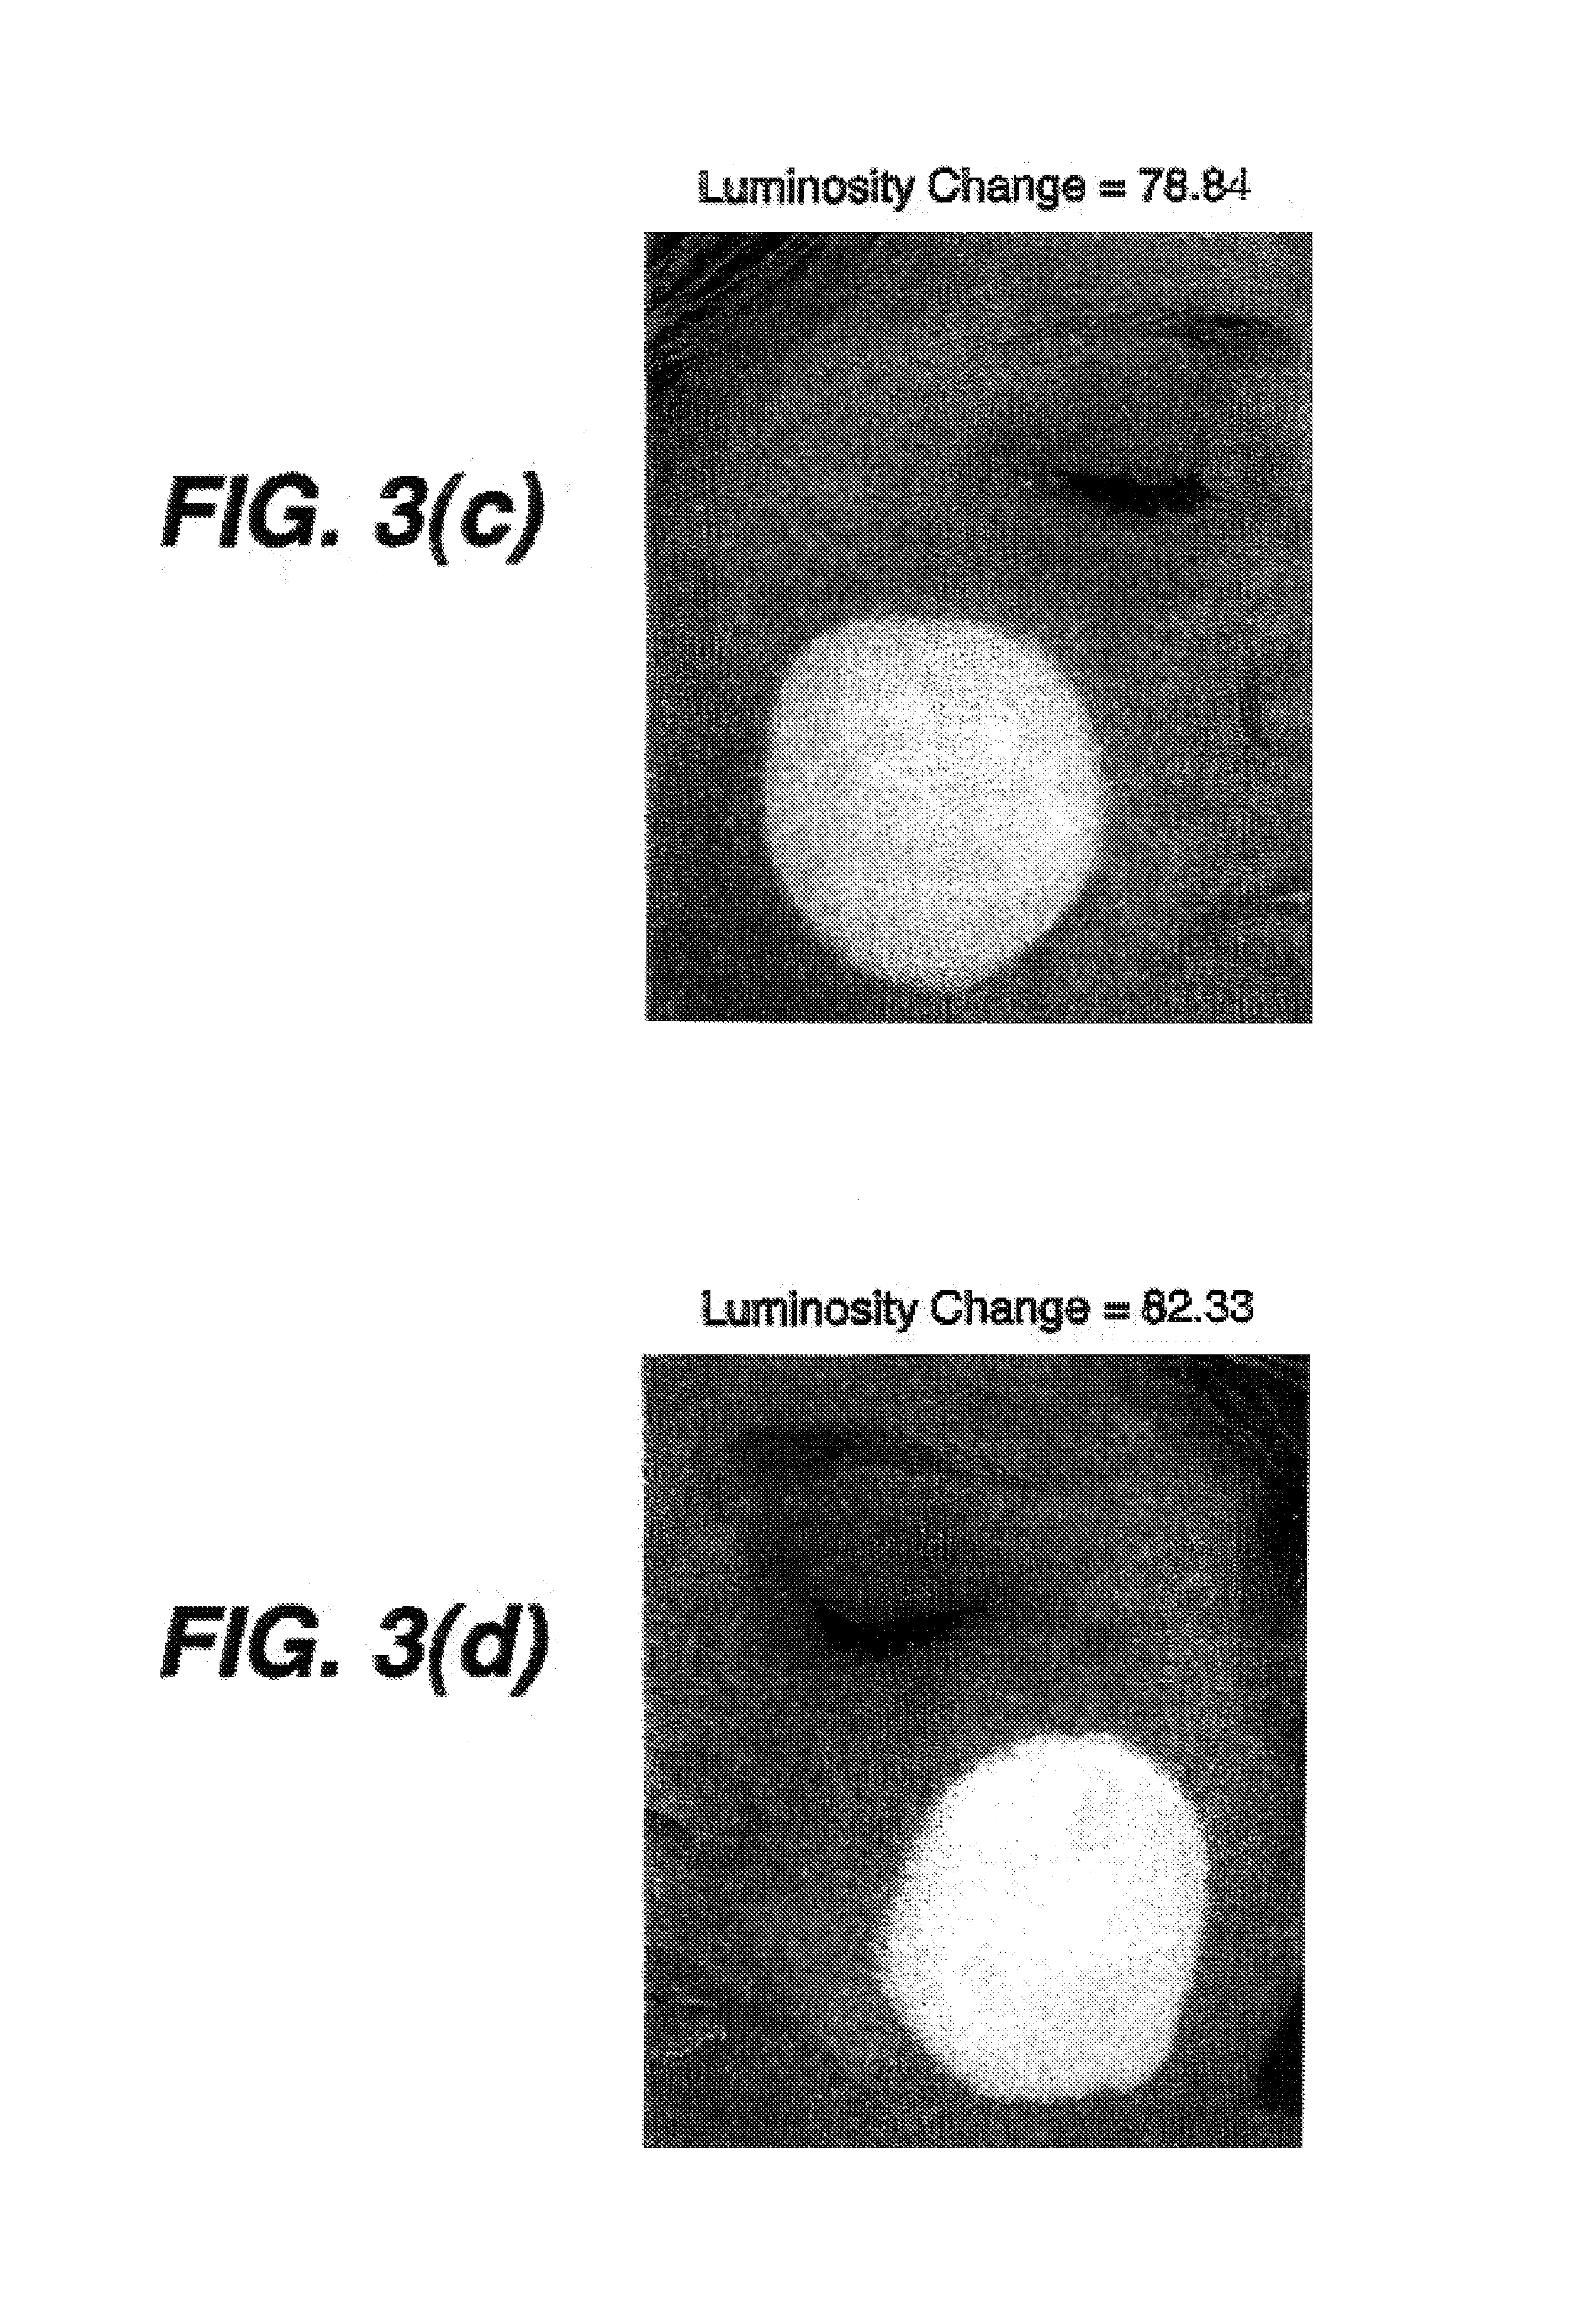 Cleansing compositions comprising a liquid silicone and ester mixture